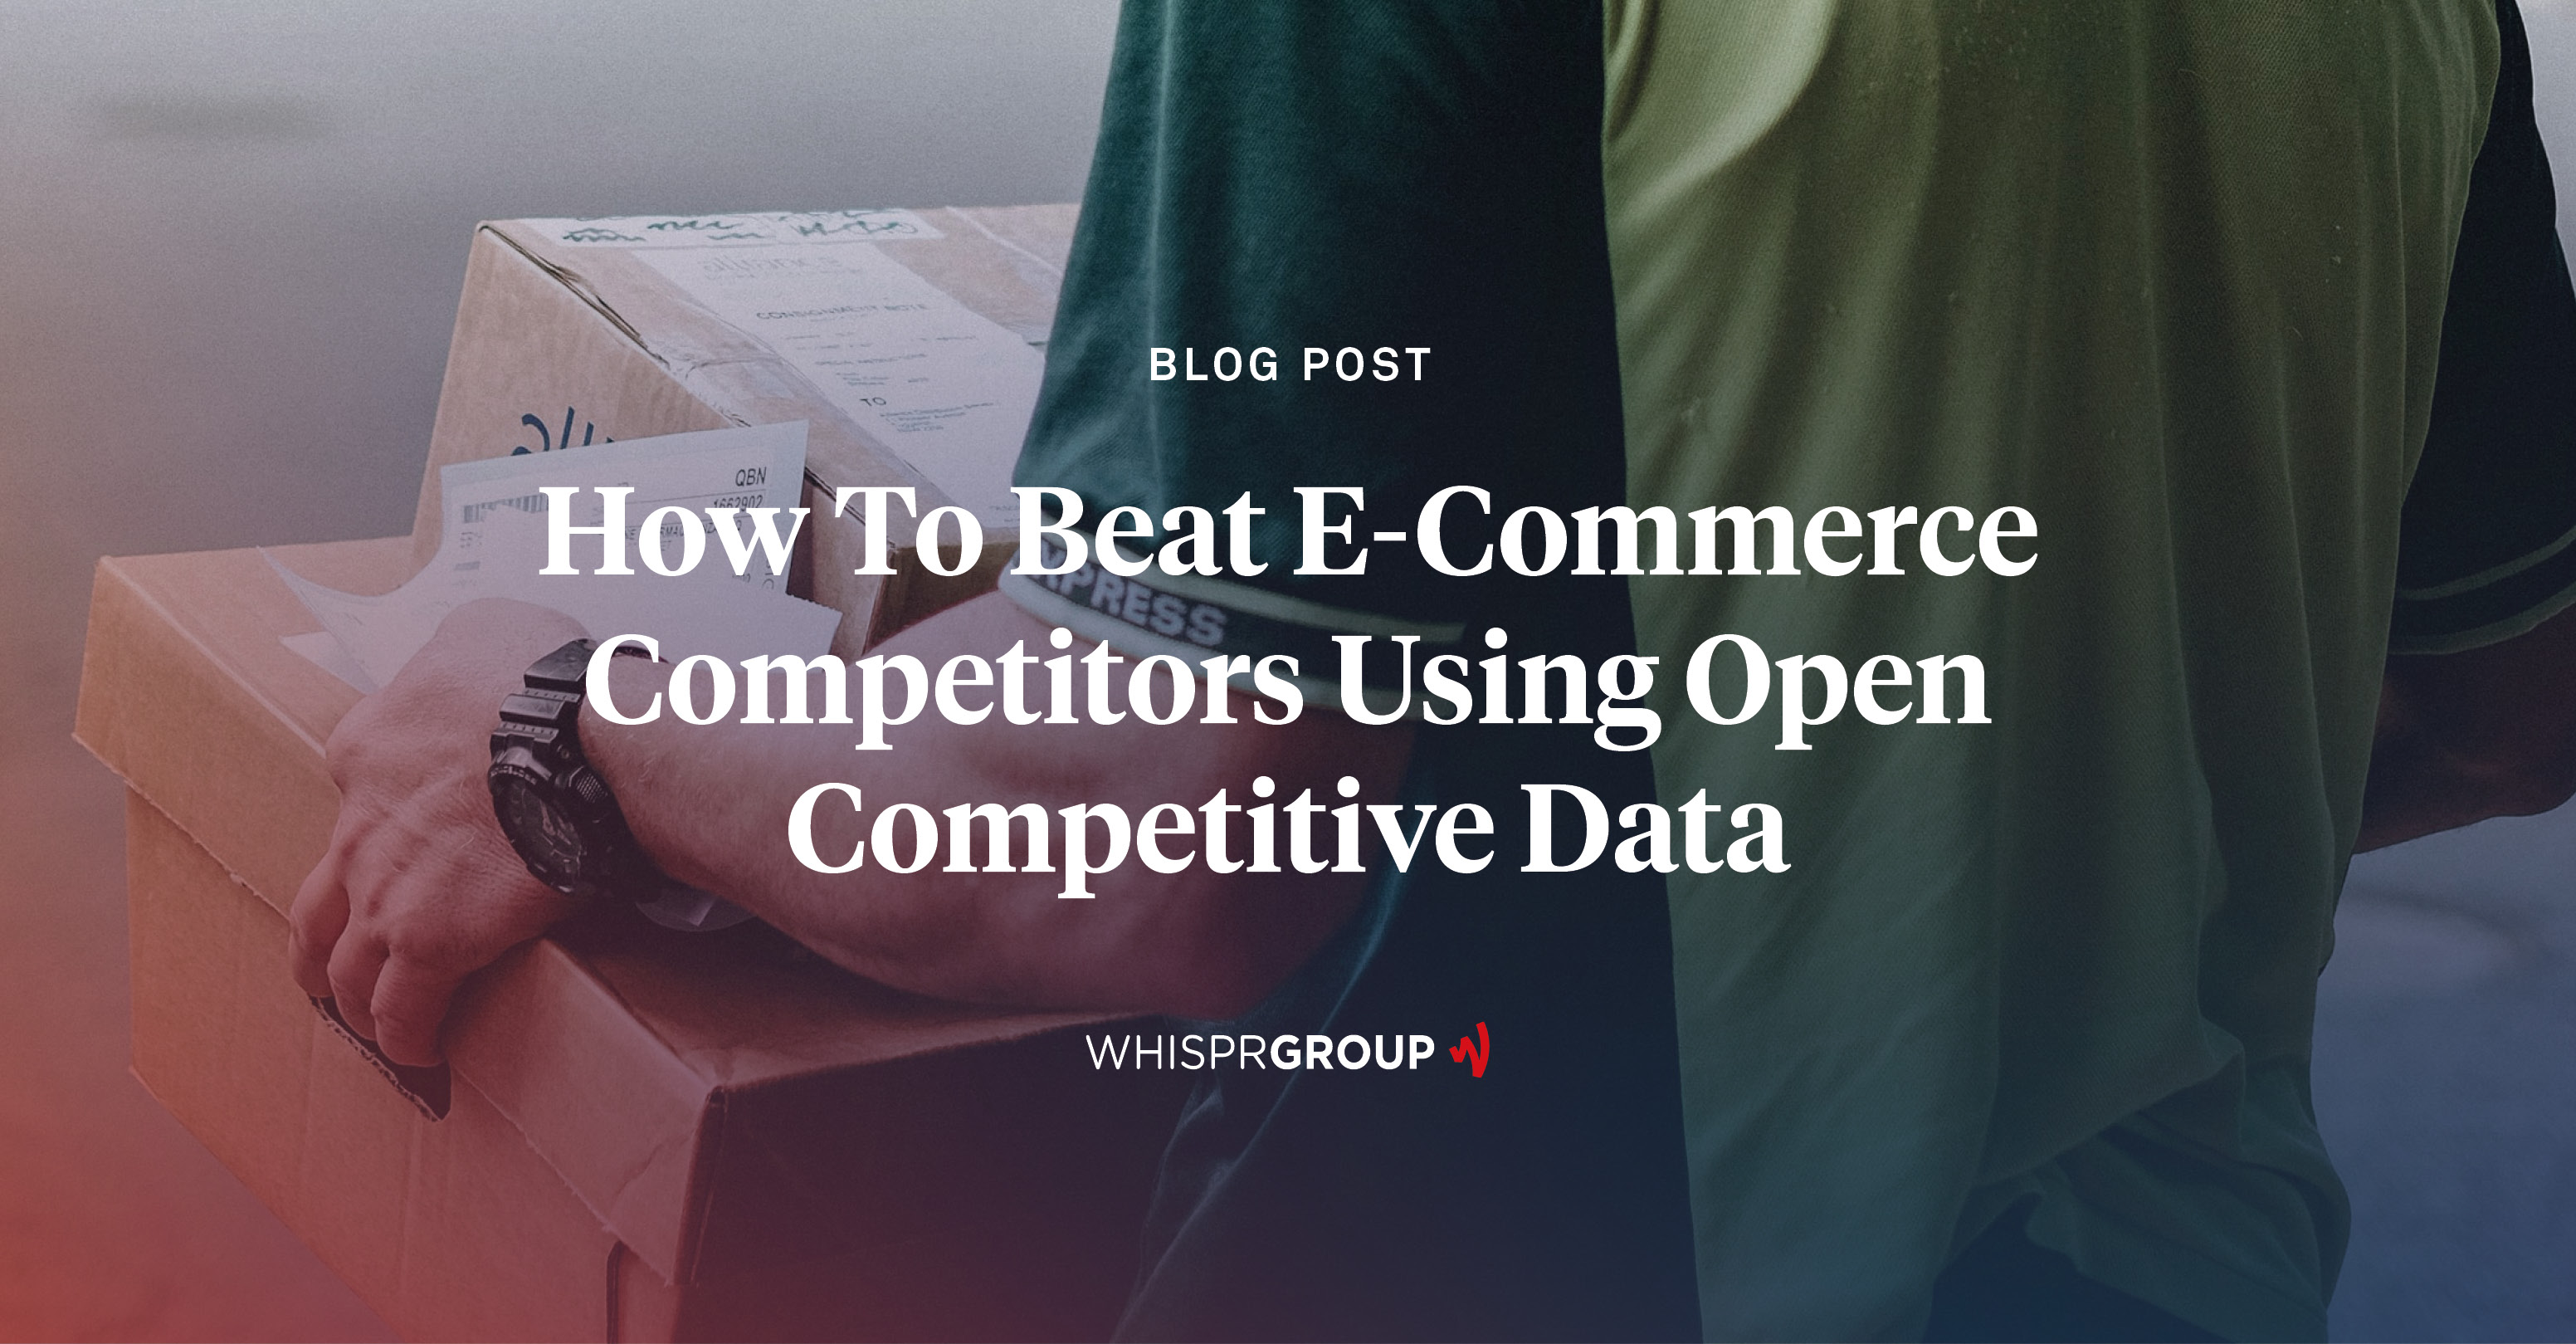 Open competitive data is a valuable resource, provided you know how to analyse it